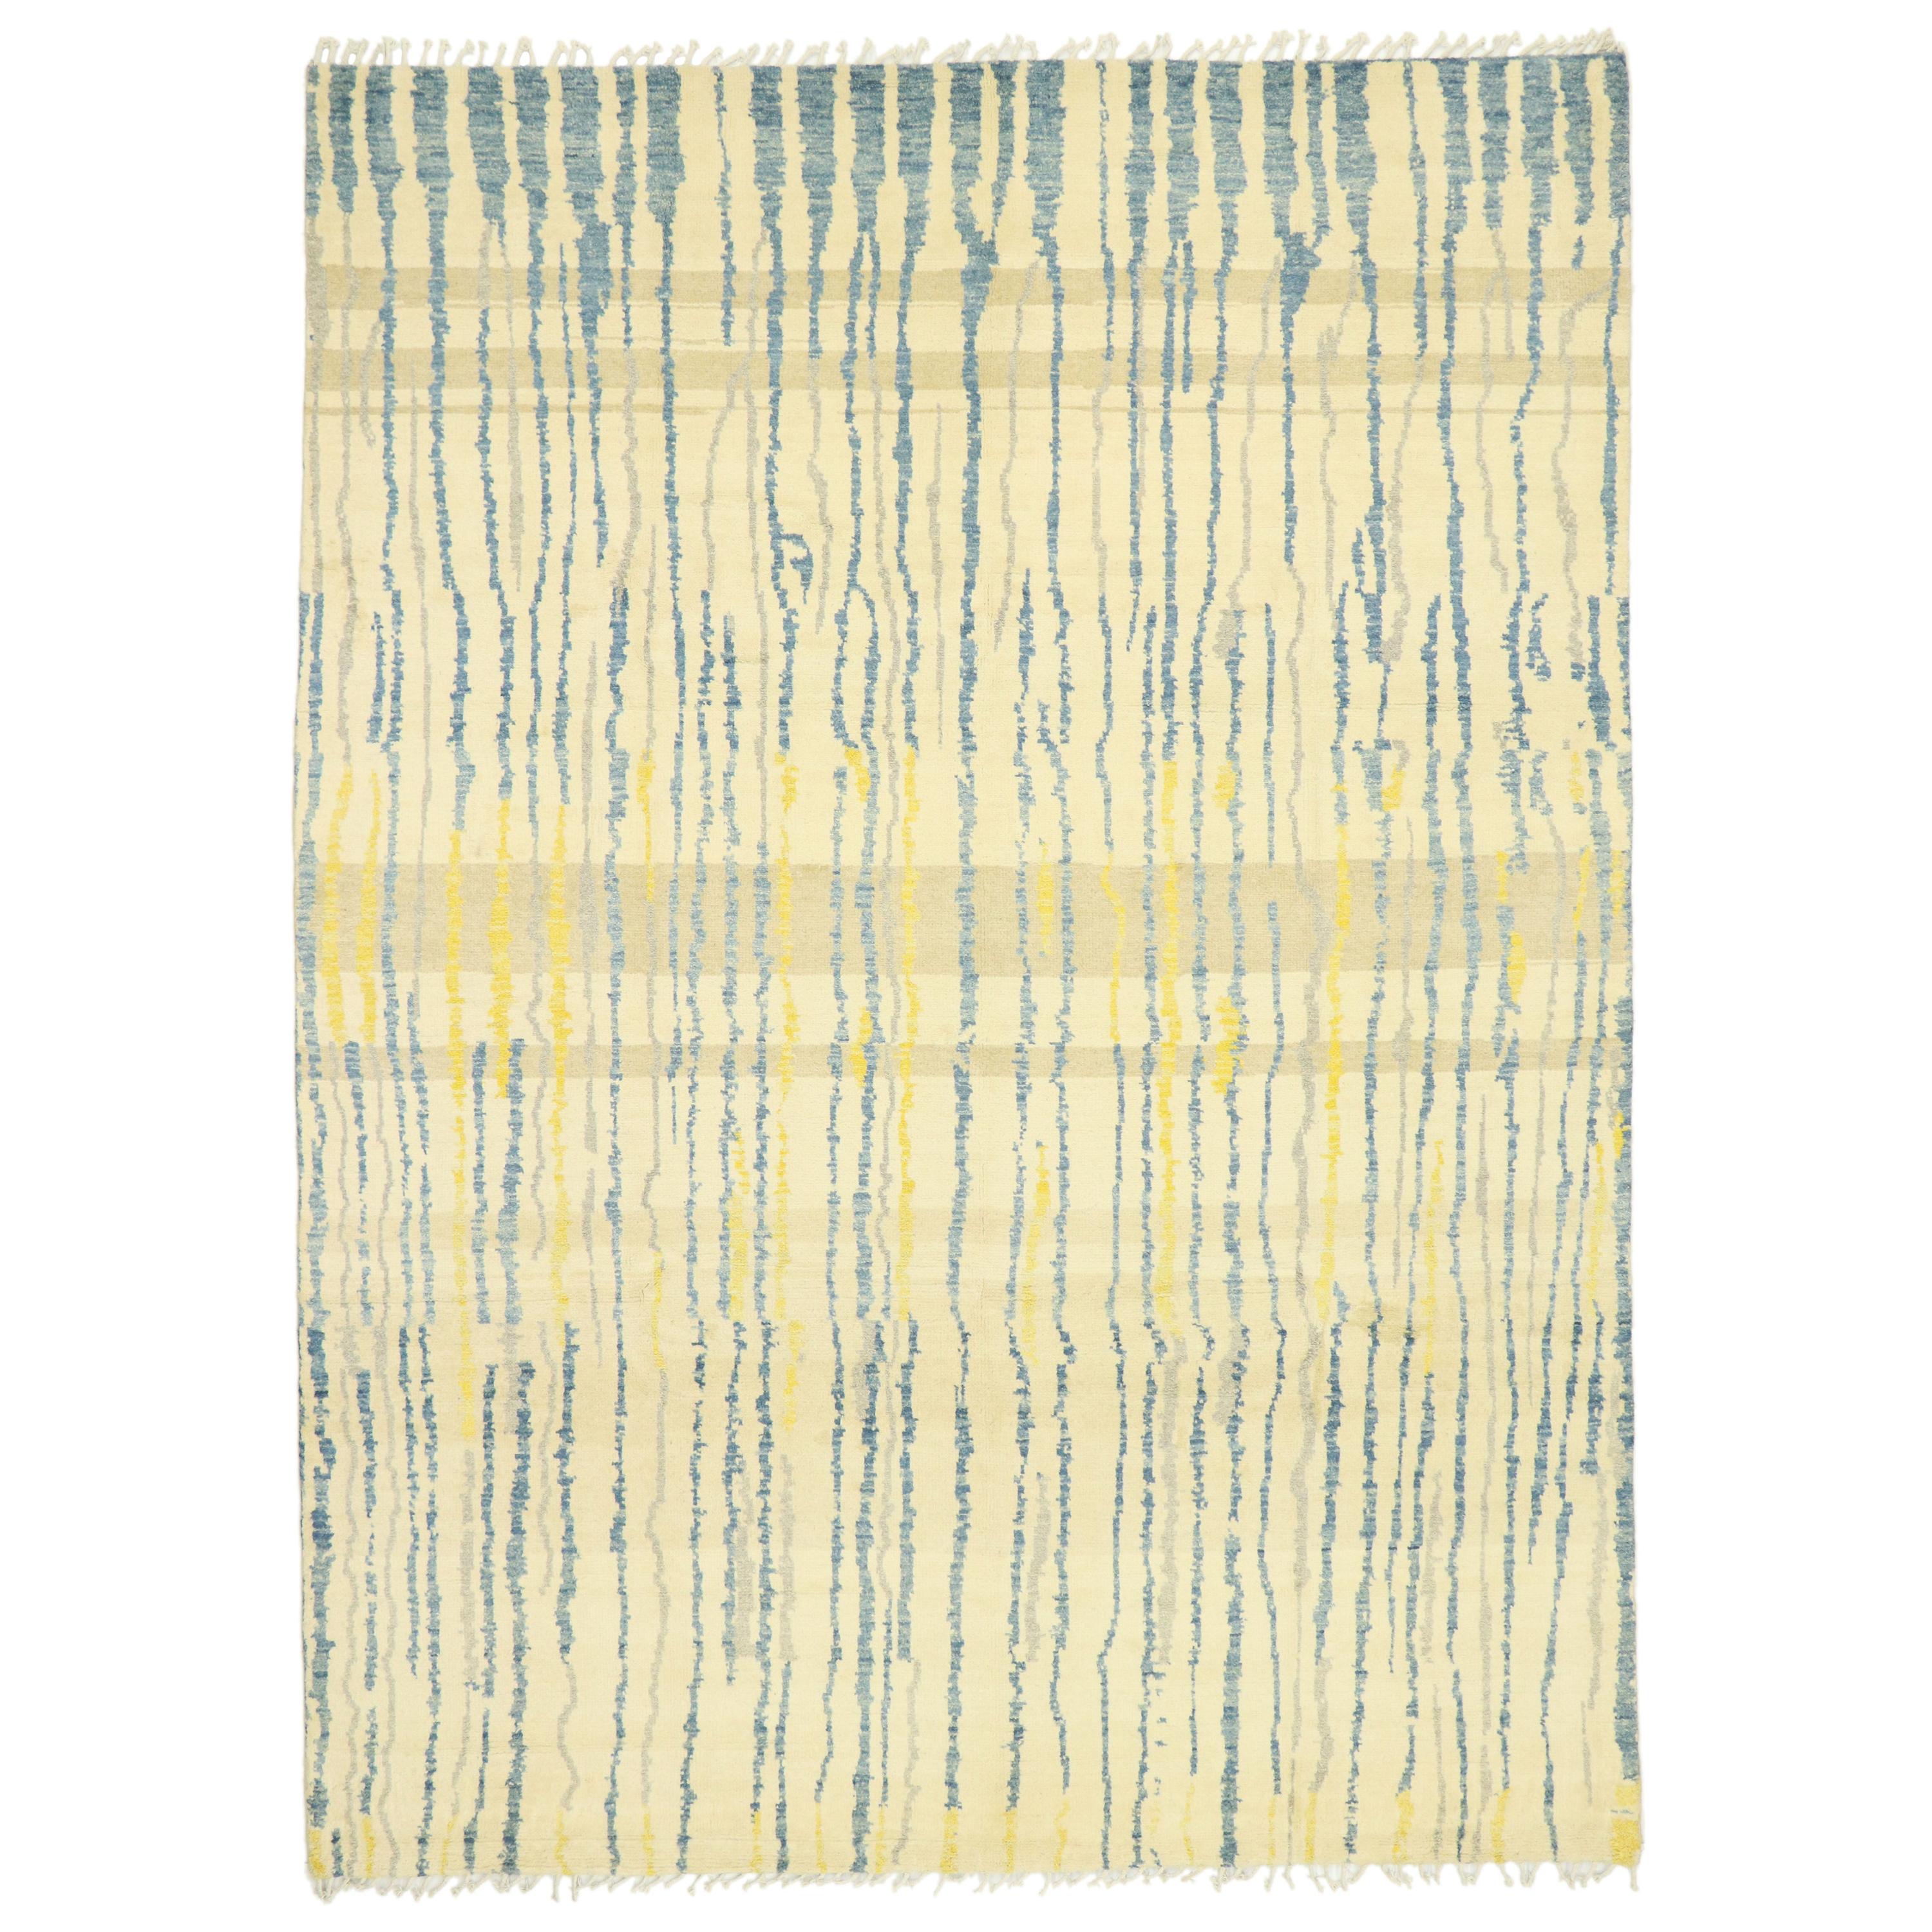 New Contemporary Moroccan Style Rug with Abstract Linear Design